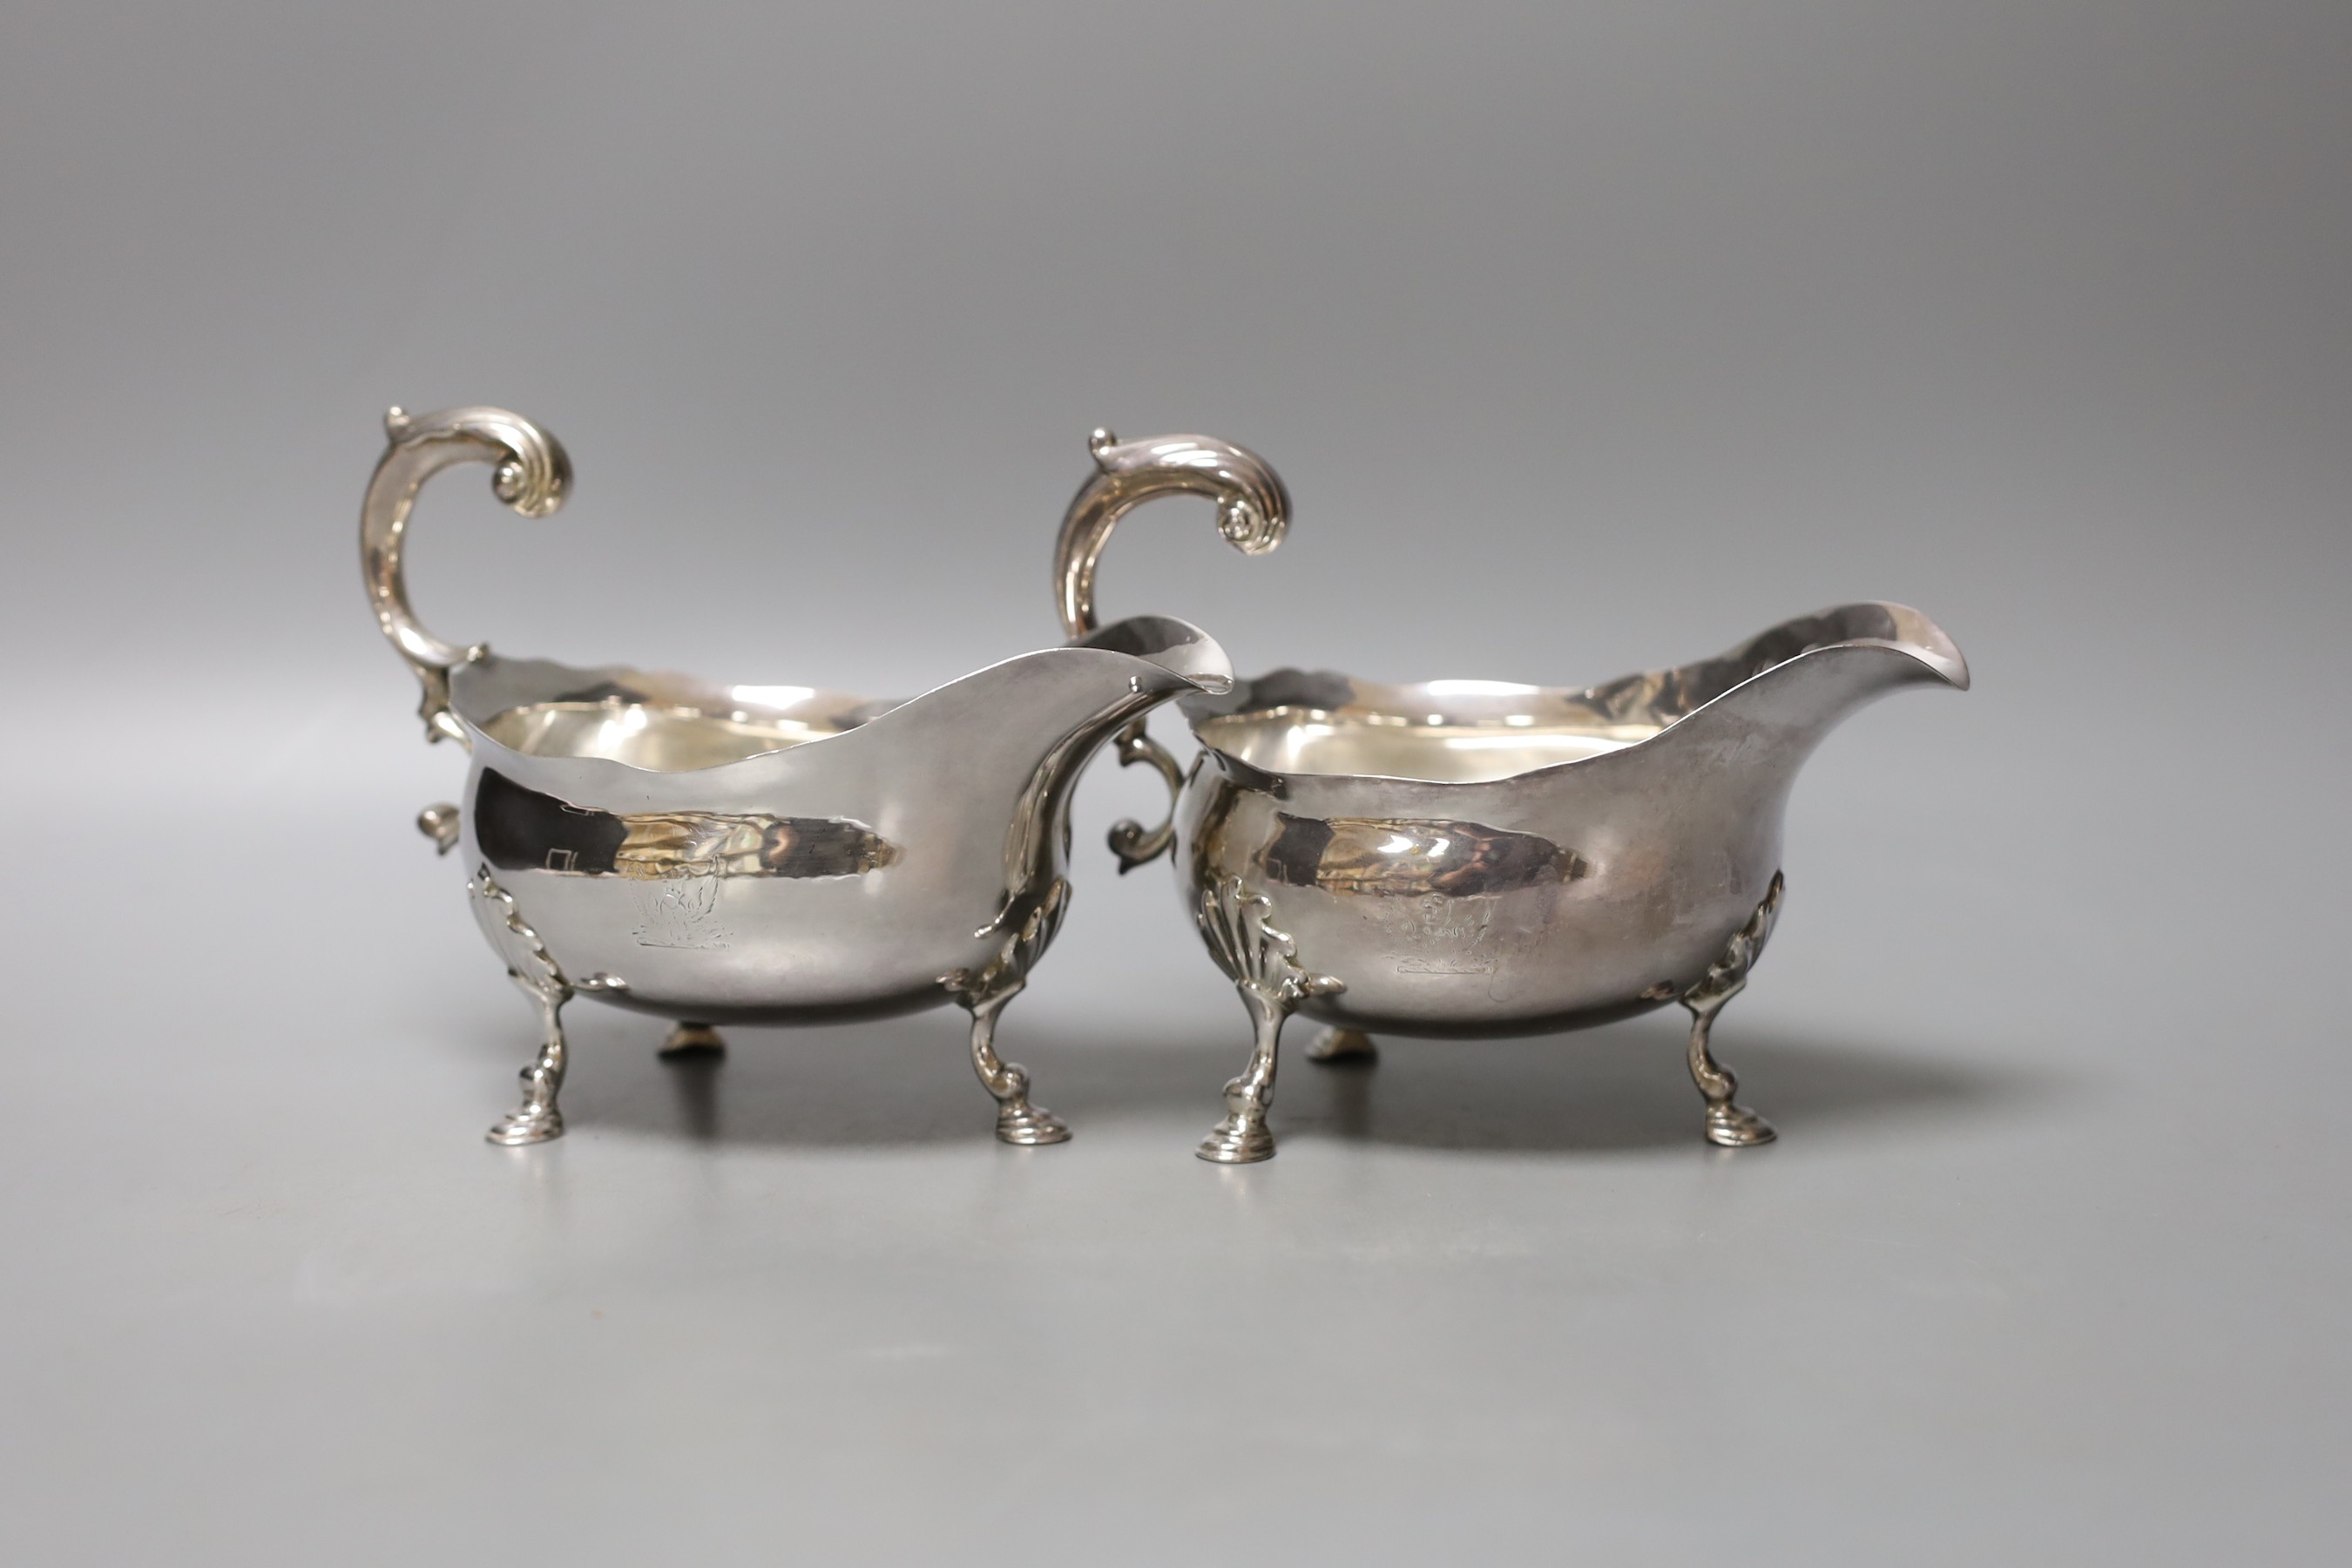 A pair of George II silver sauceboats, with flying scroll handles, maker's mark rubbed, London, 1752, height 12.8cm, 16.5oz.                                                                                                